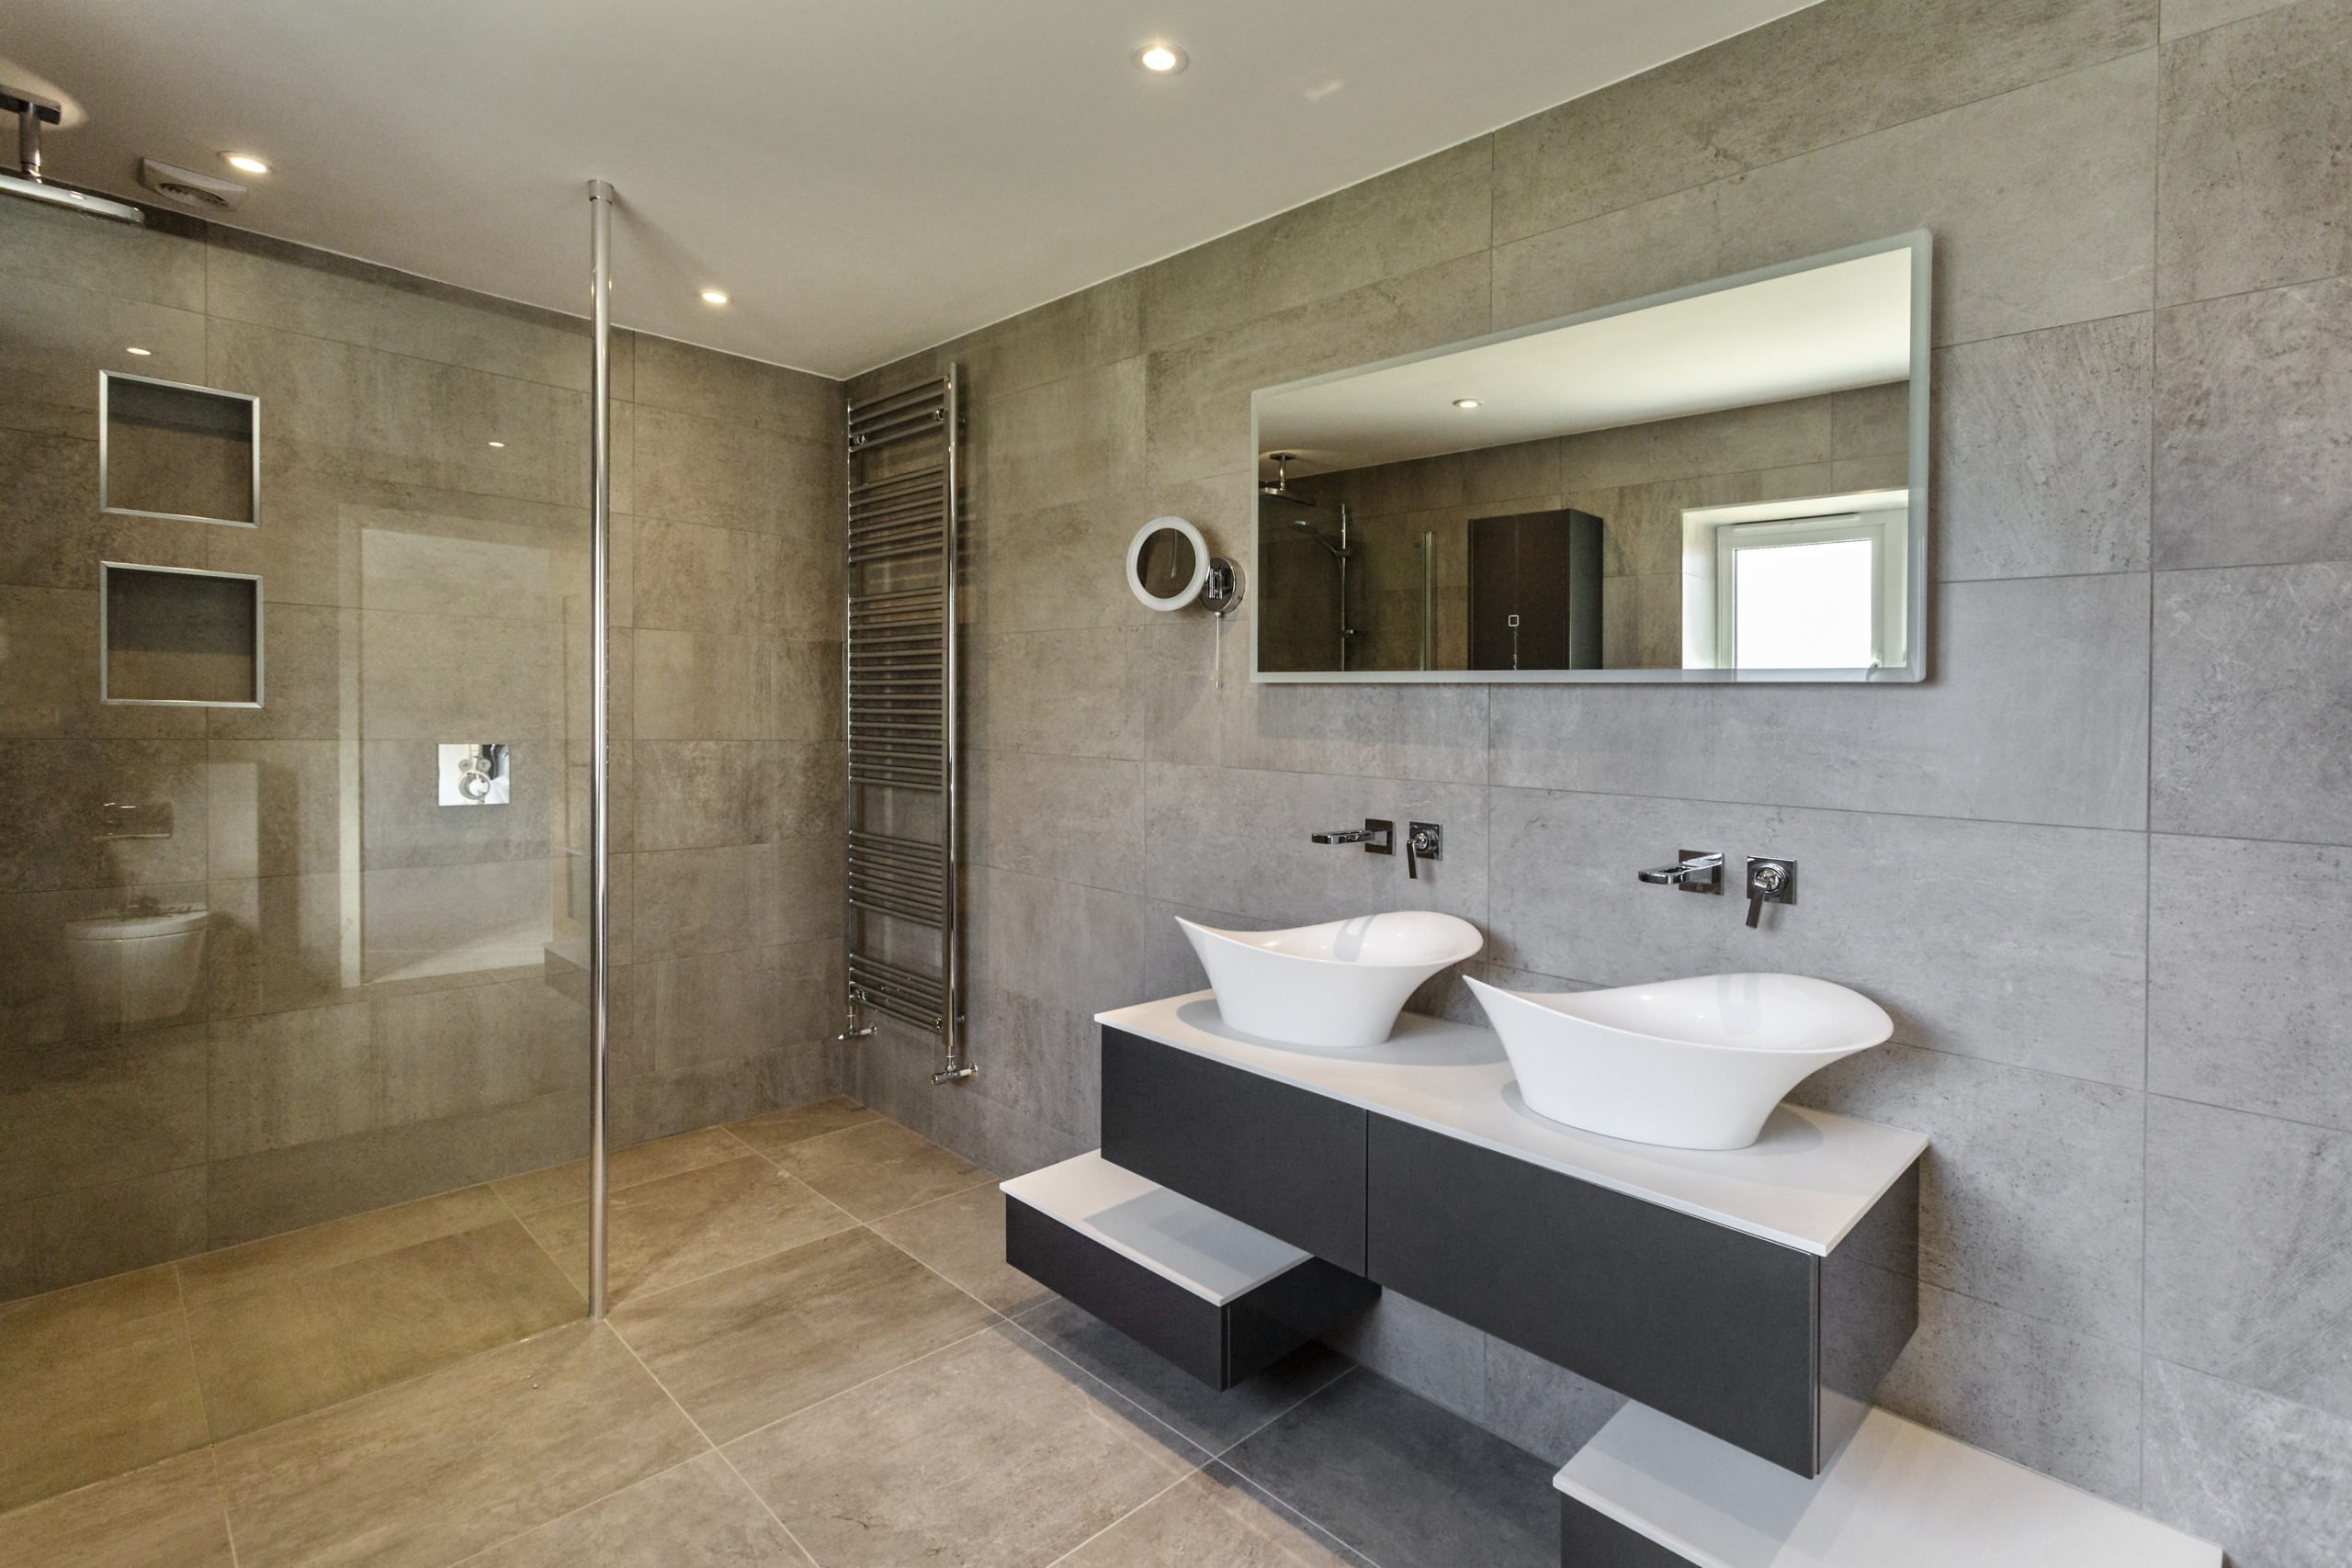 Ensuite at Appleton Homes with contemporary bathroom design